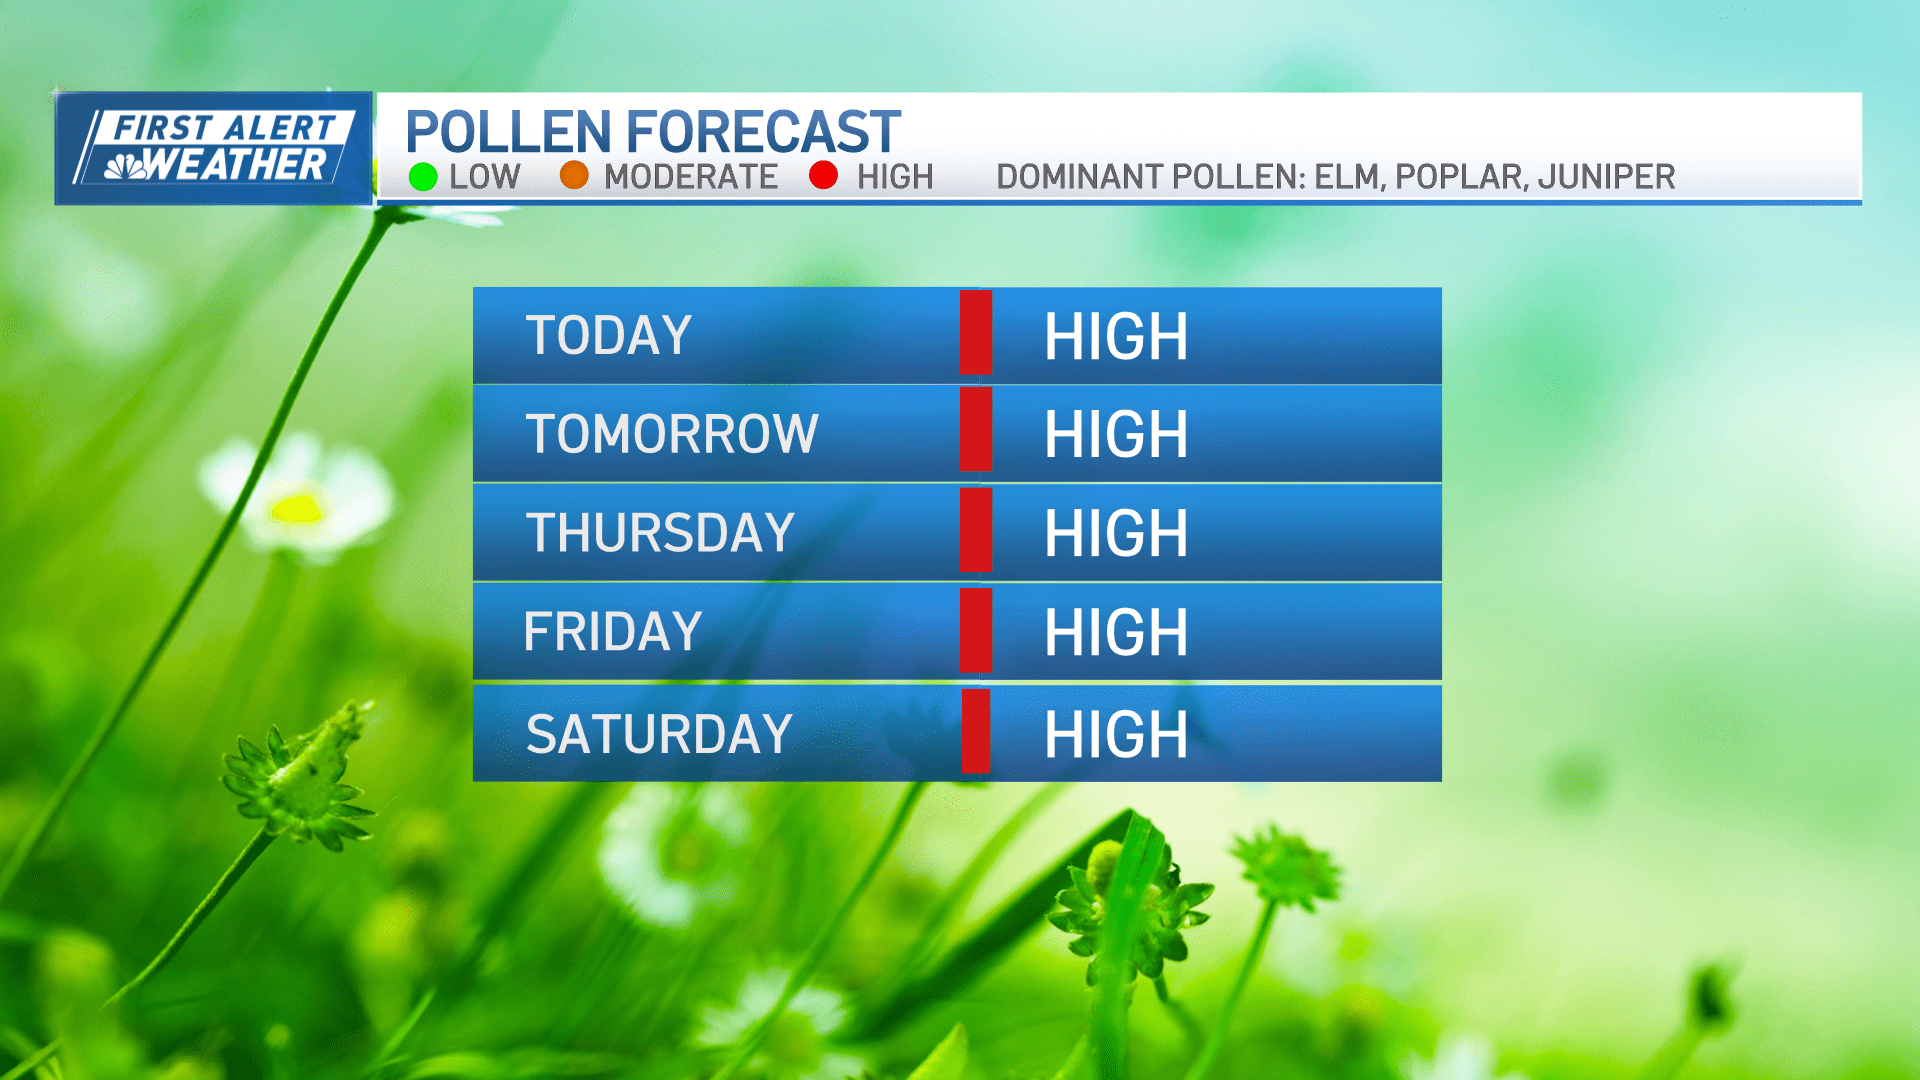 A graphic noting that the pollen forecast is high through Saturday in the Greater Boston area.